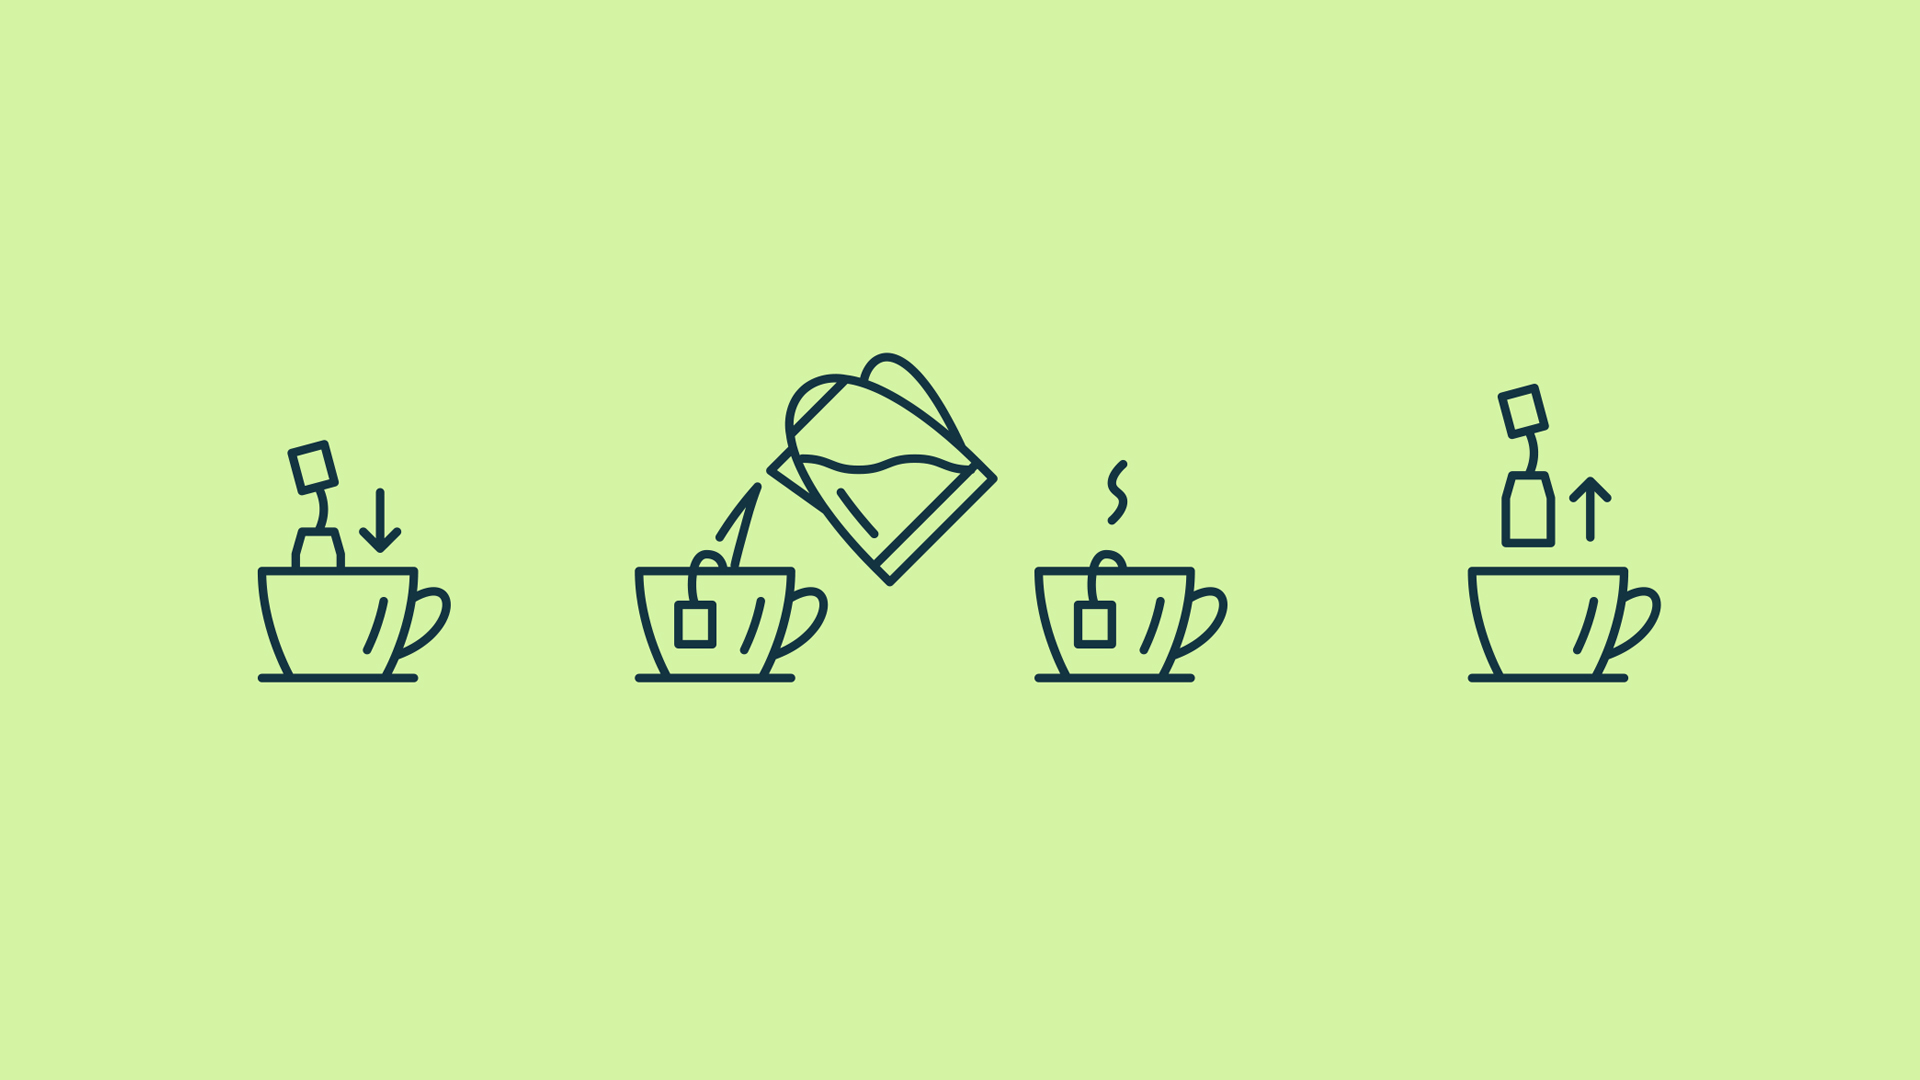 A step by step guide to making a cup of tea